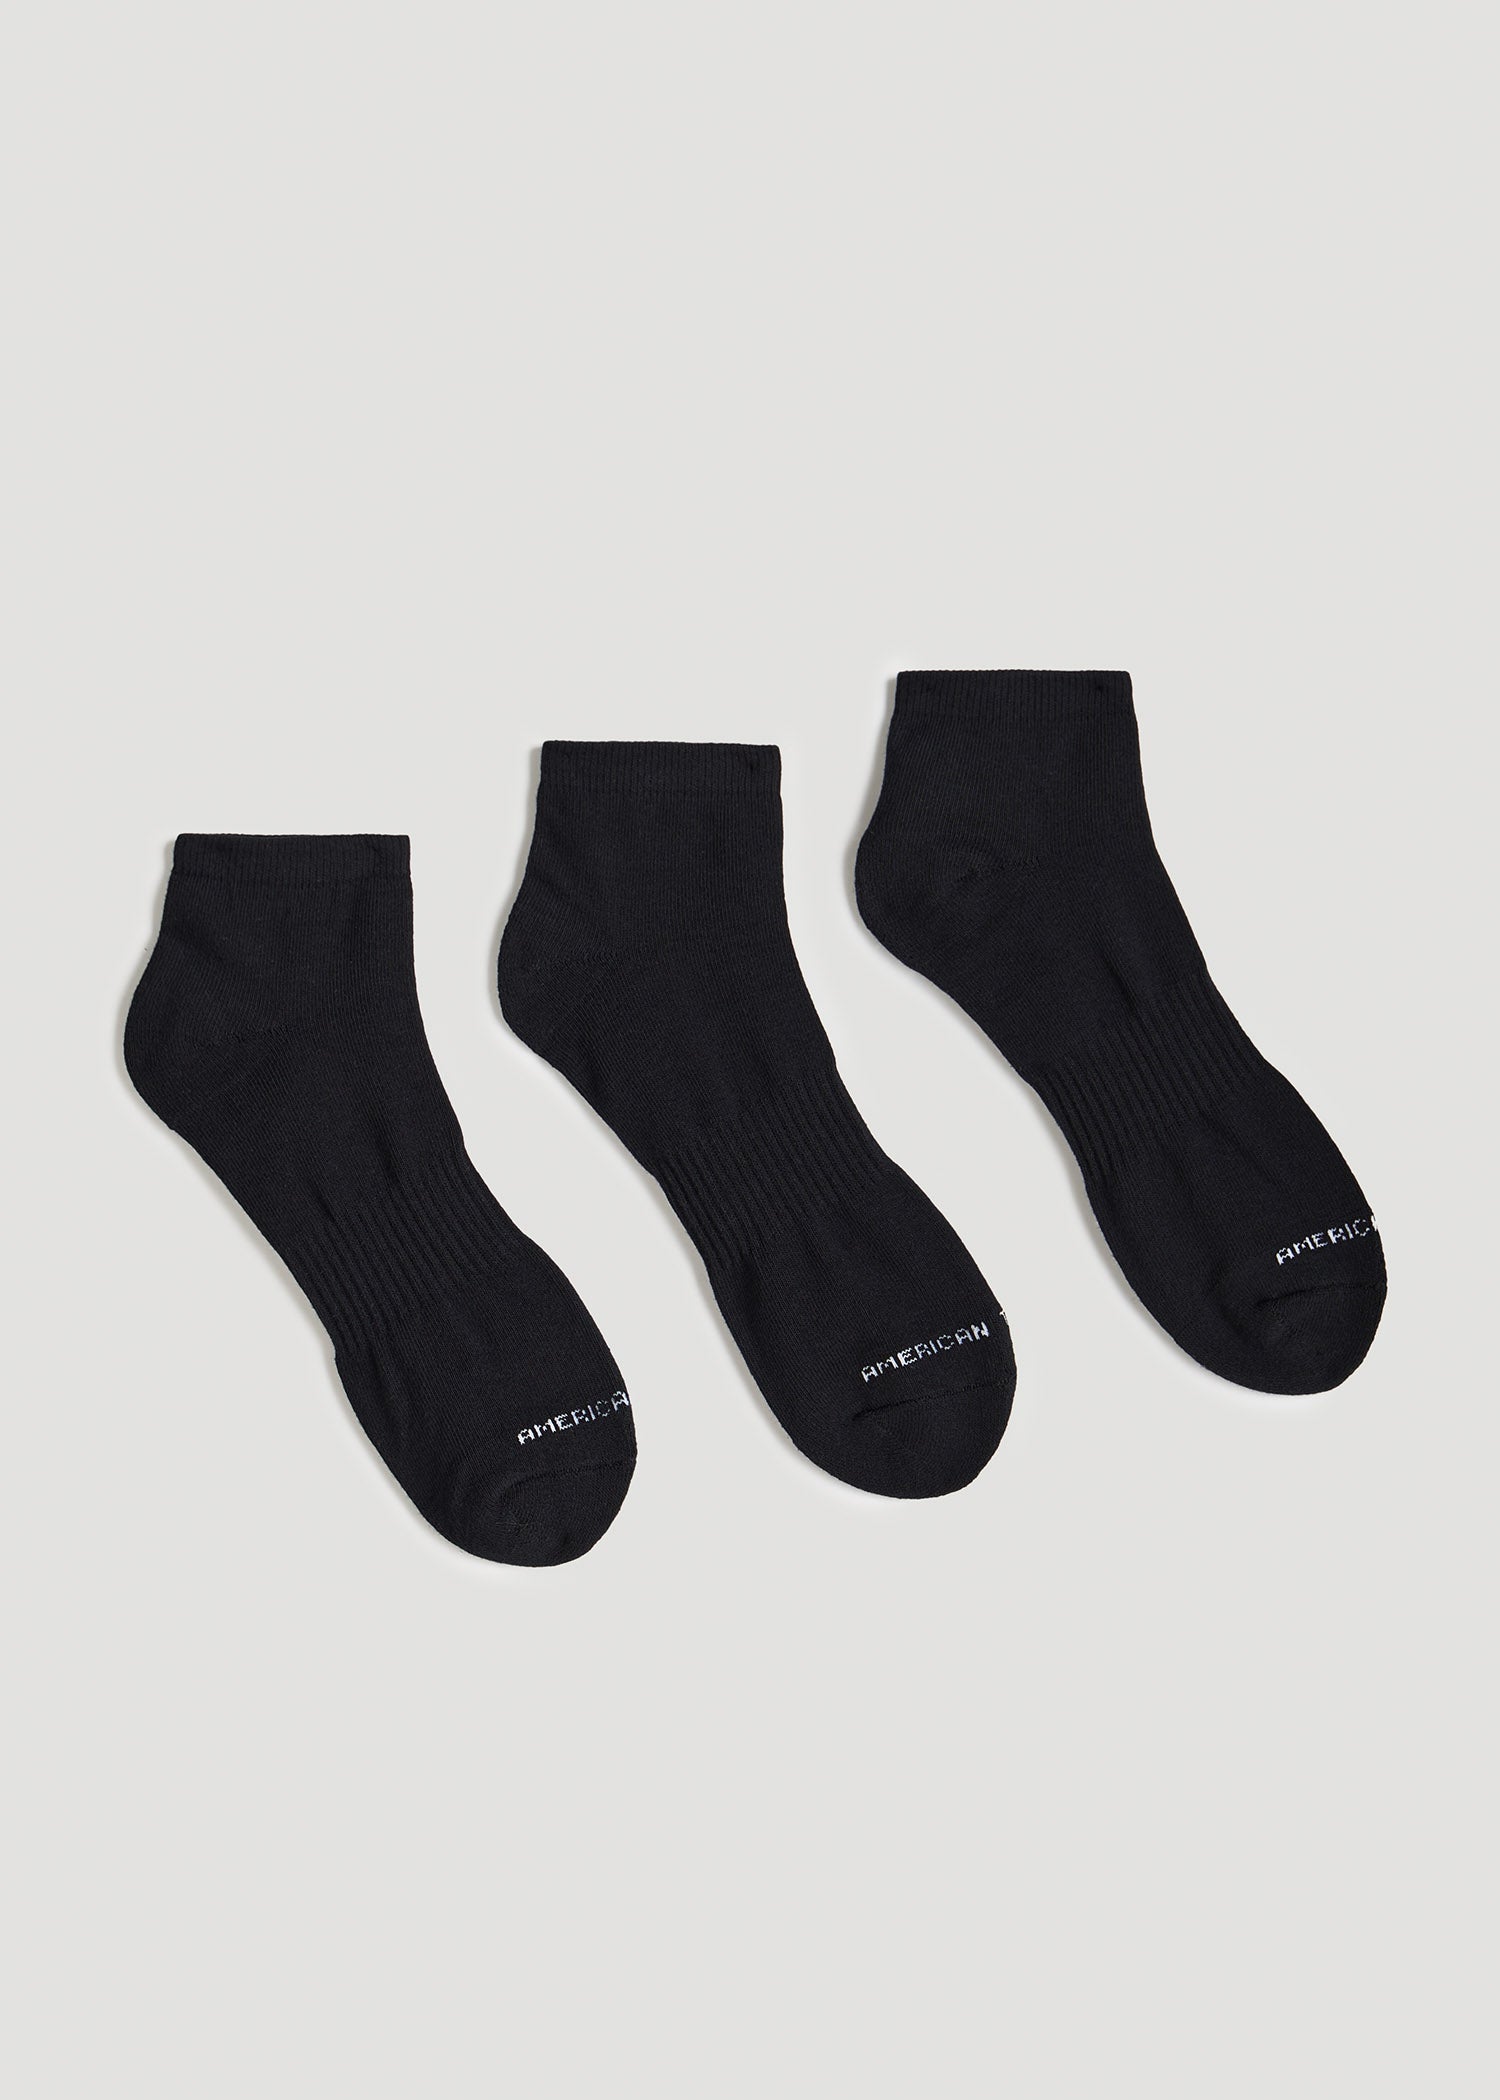    American-Tall-Mens-Athletic-Low-Ankle-Socks-X-Large-Size-14-17-Black-3-Pack-back